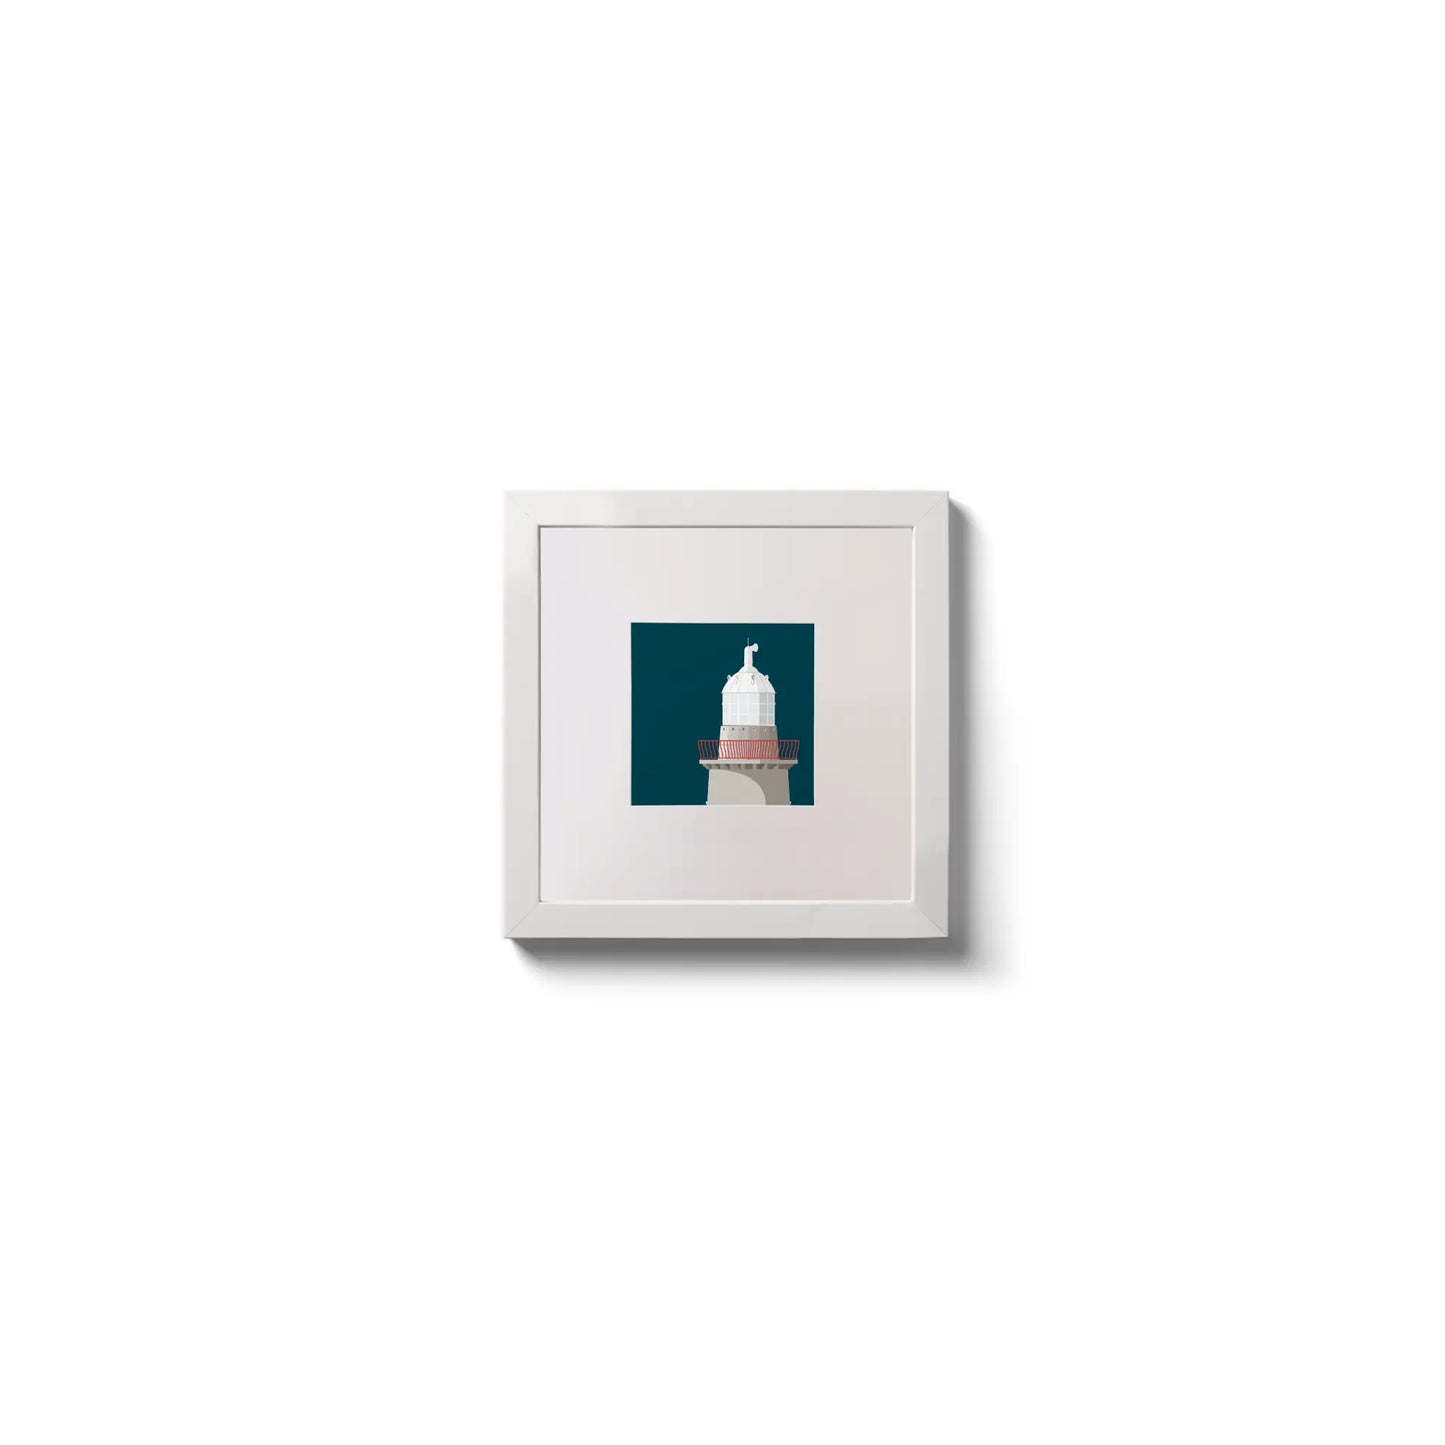 Illustration of Oyster Island lighthouse on a midnight blue background,  in a white square frame measuring 10x10cm.